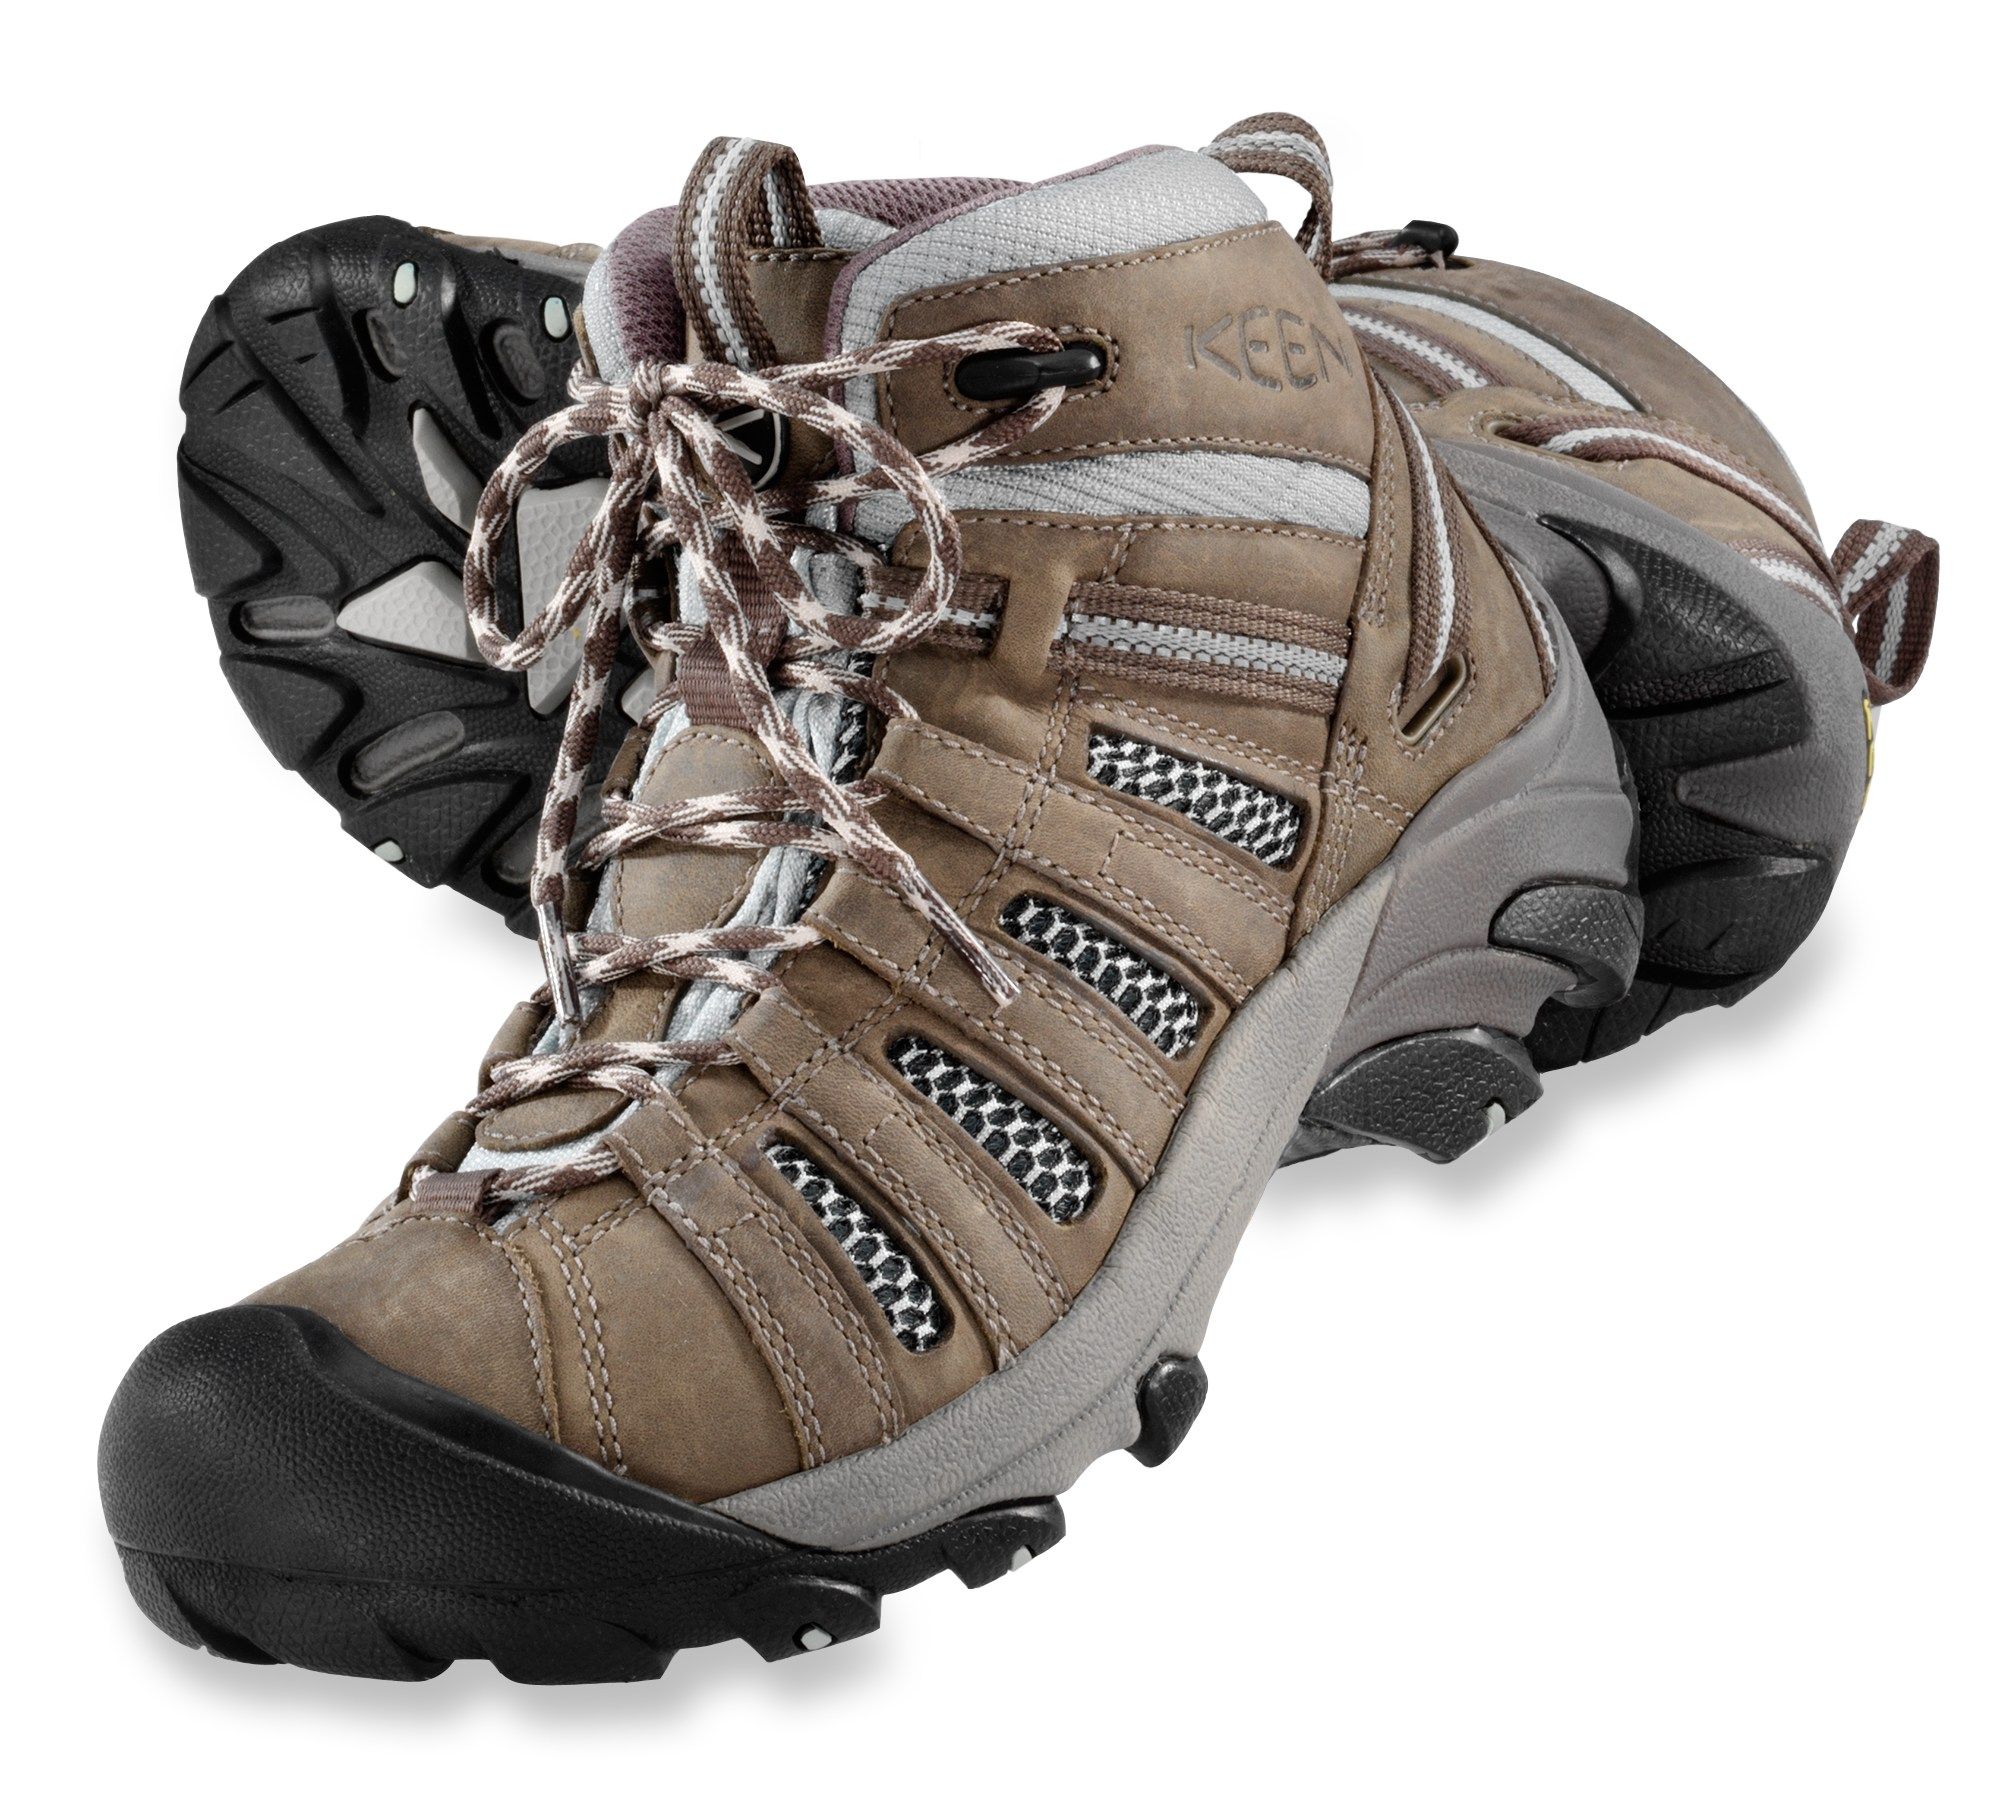 KEEN Voyageur Mid Hiking Boots